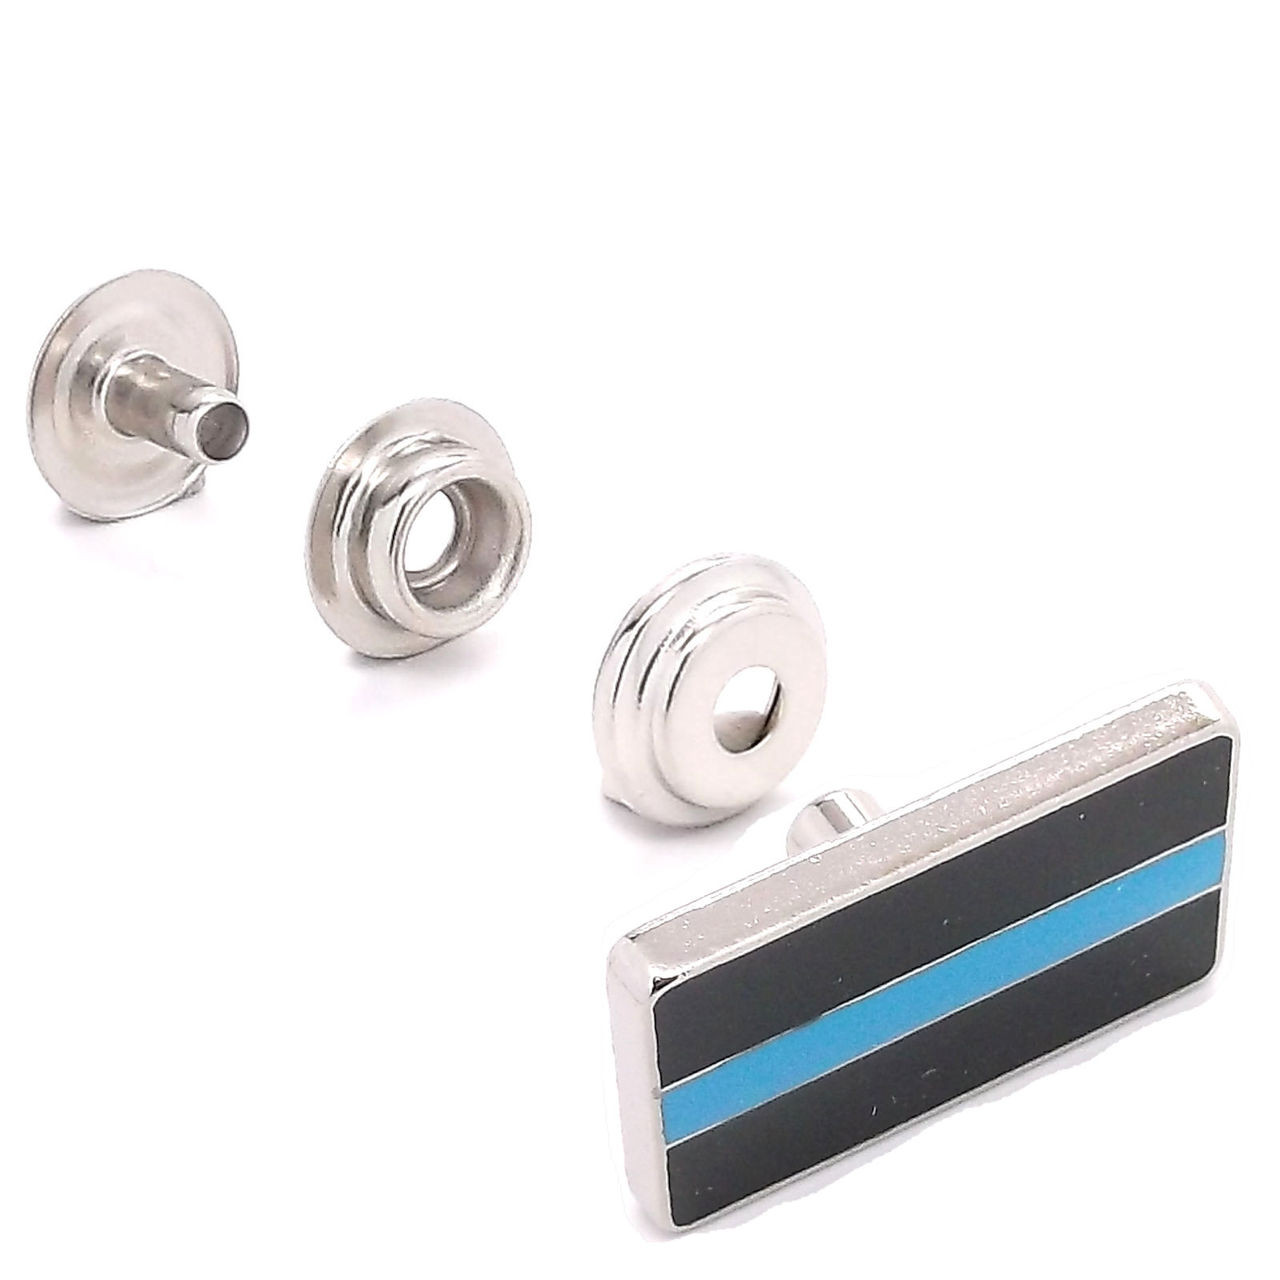 Police Support Pin Line 24 Snap Cap Nickel Set